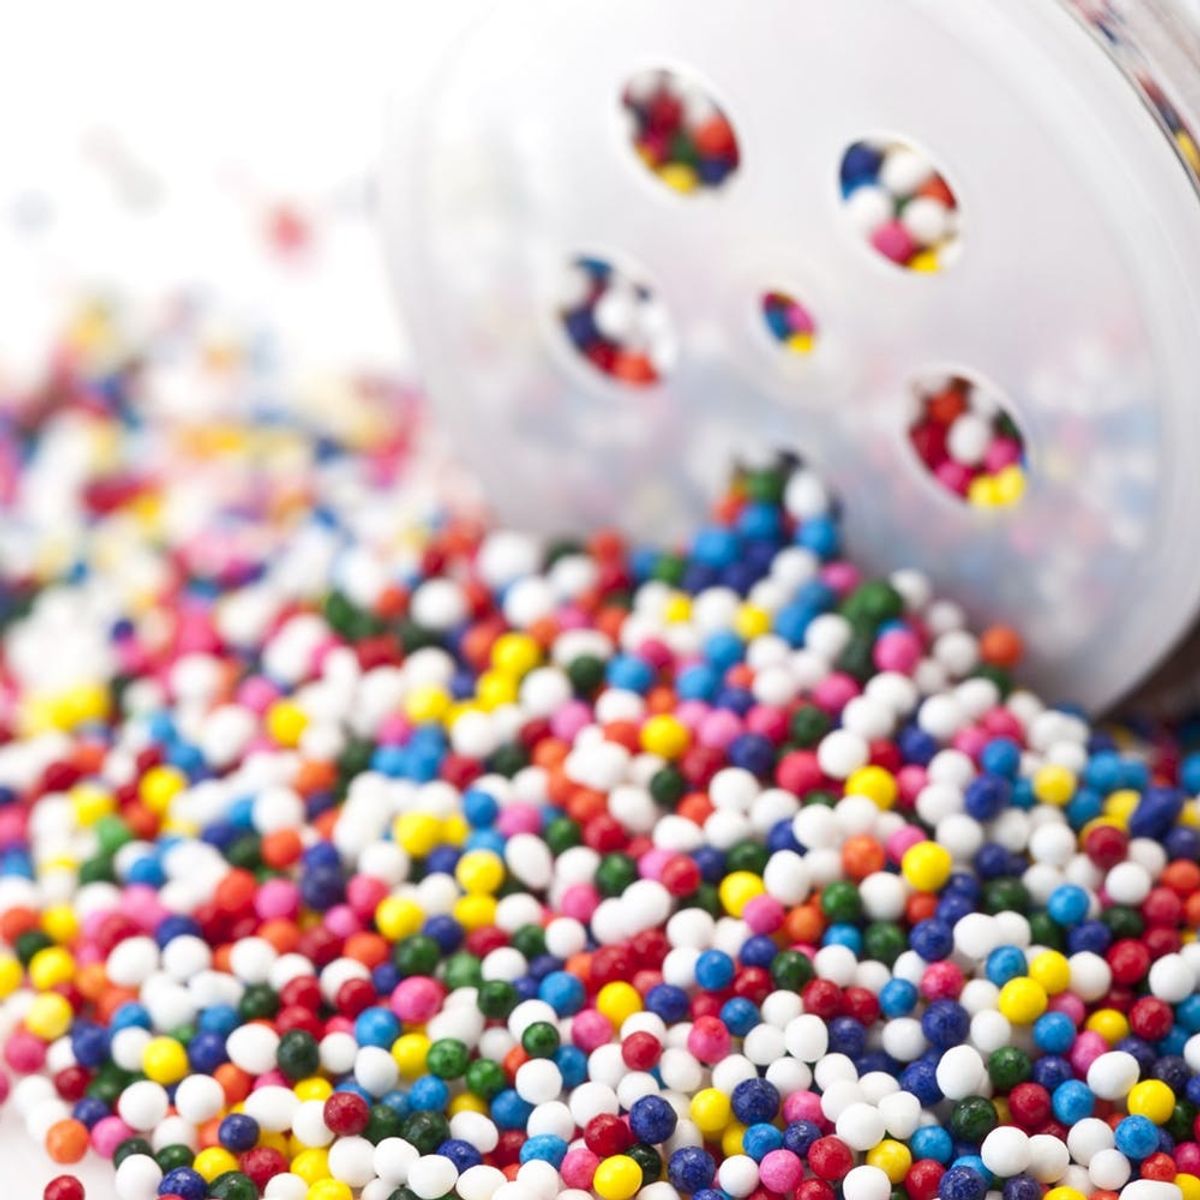 This Video of Rainbow Sprinkles Being Made Is Weirdly Mesmerizing